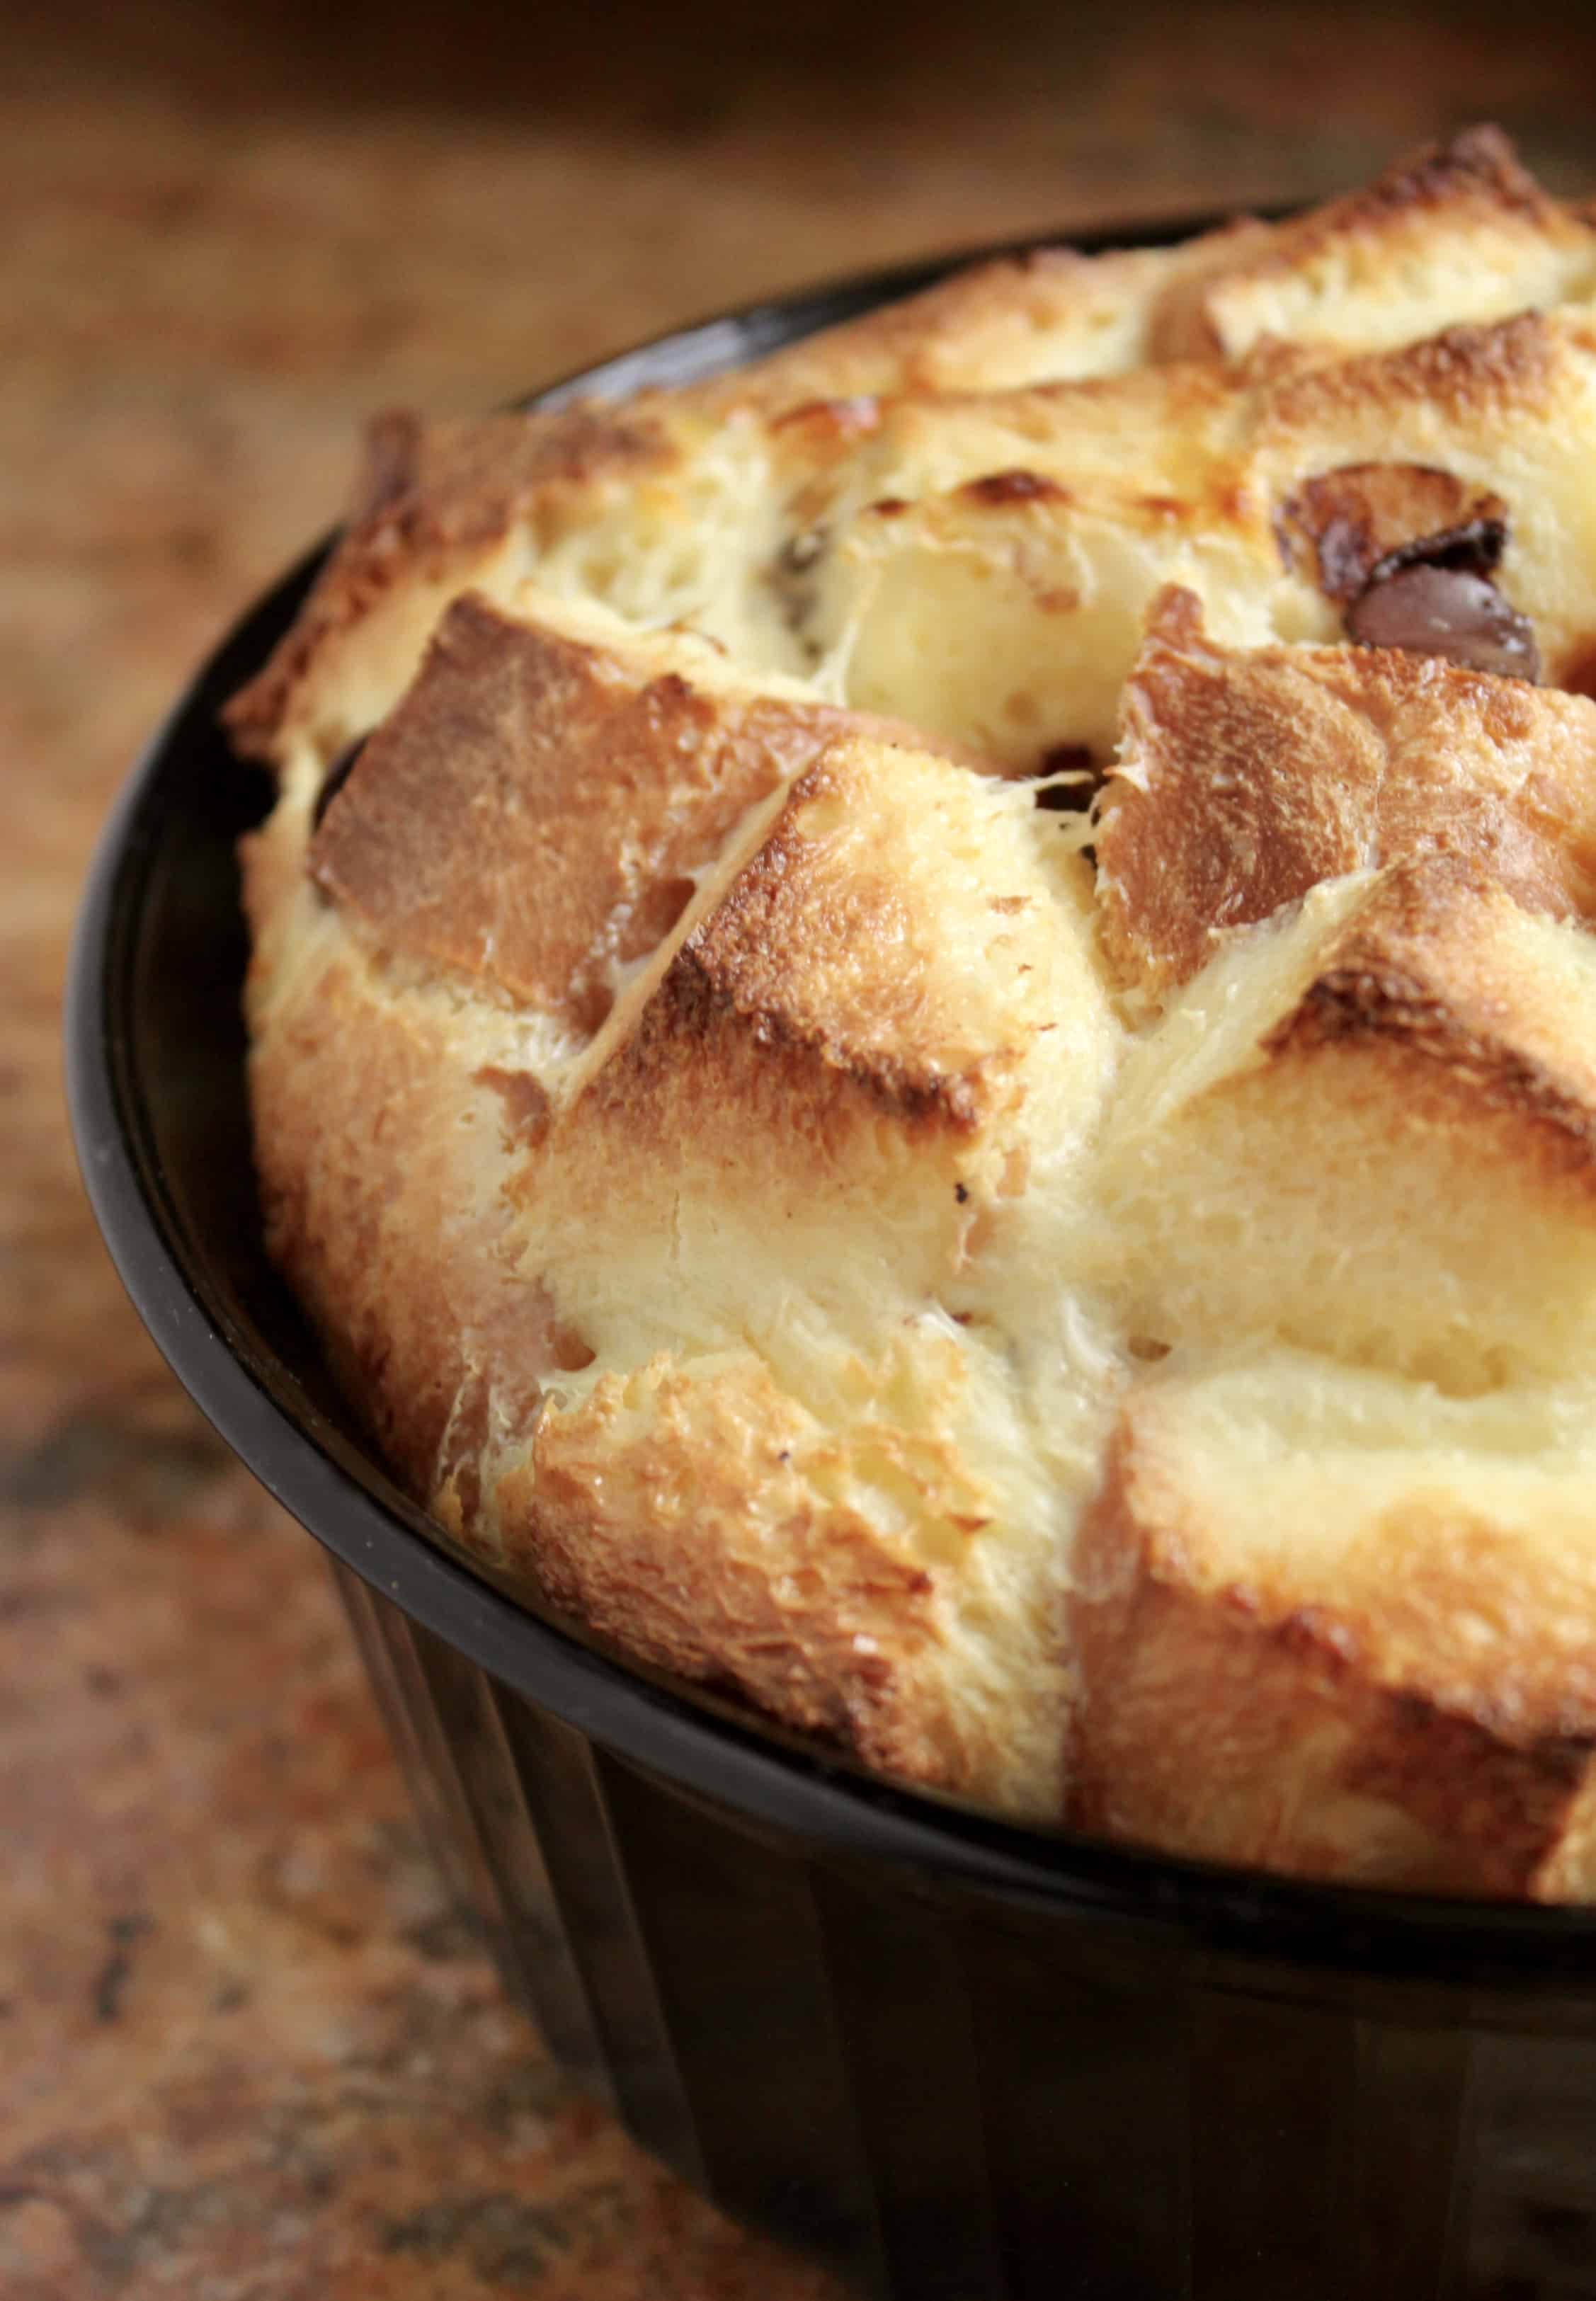 Bread and Butter pudding in a bowl